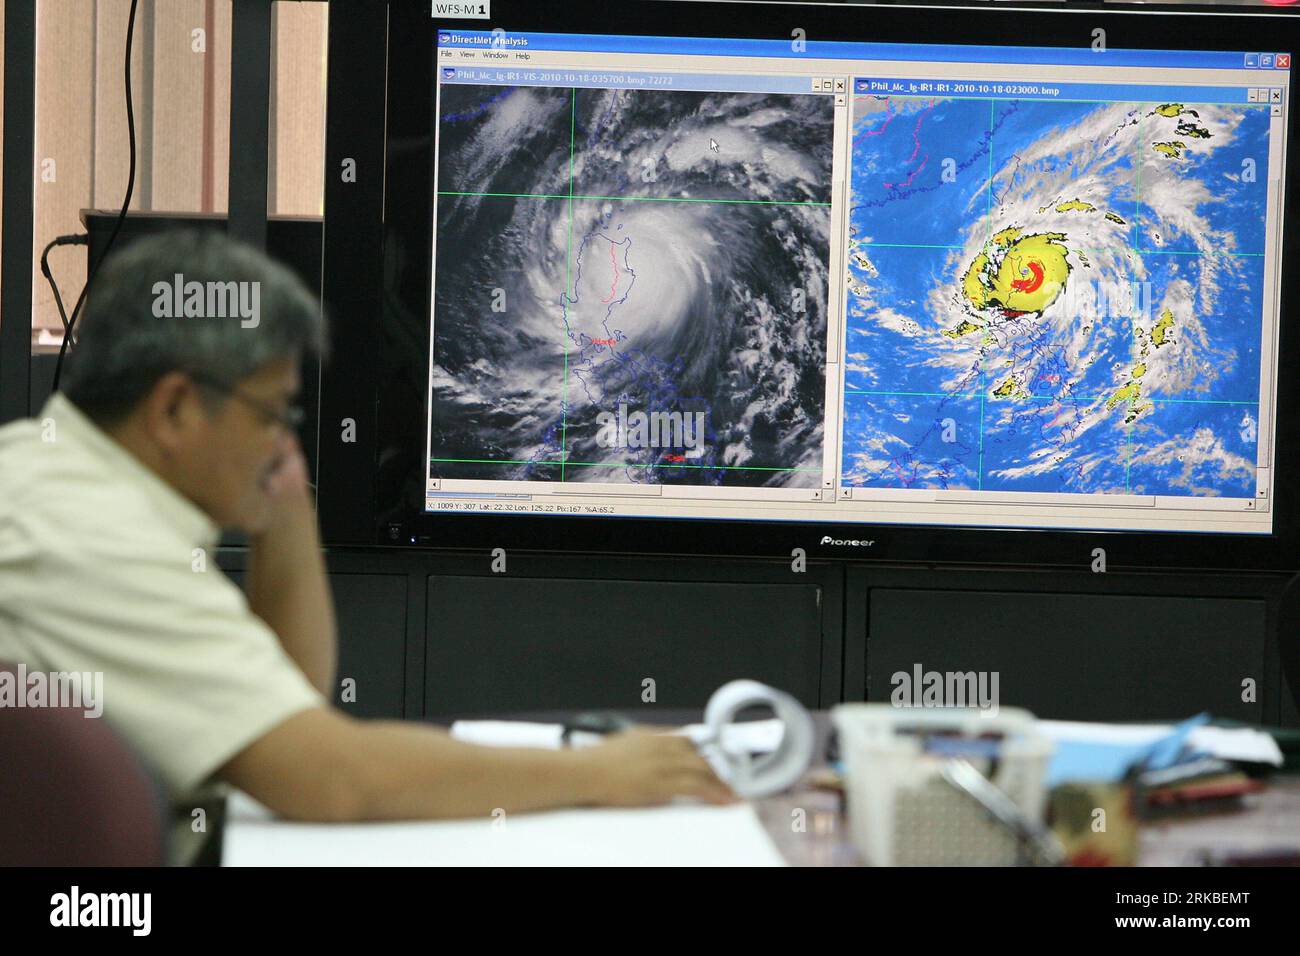 Bildnummer: 54546296  Datum: 18.10.2010  Copyright: imago/Xinhua (101018) -- MANILA, Oct. 18, 2010 (Xinhua) -- An employee of the Philippine Atmospheric Geophysical and Astronomical Services Administration (PAGASA) tracks the path of typhoon Megi inside the PAGASA weather forecasting center in Quezon City, Philippines, October 18, 2010. Typhoon Megi packed maximum sustained winds of 225 kph near the center and gustiness of up to 260 kph and entered the northern areas of Luzon, where 3,066 in Isabela and Cagayan provinces were evacuated. (Xinhua/Rouelle Umali) (ypf) PHILIPPINES-TYPHOON-DISASTER Stock Photo